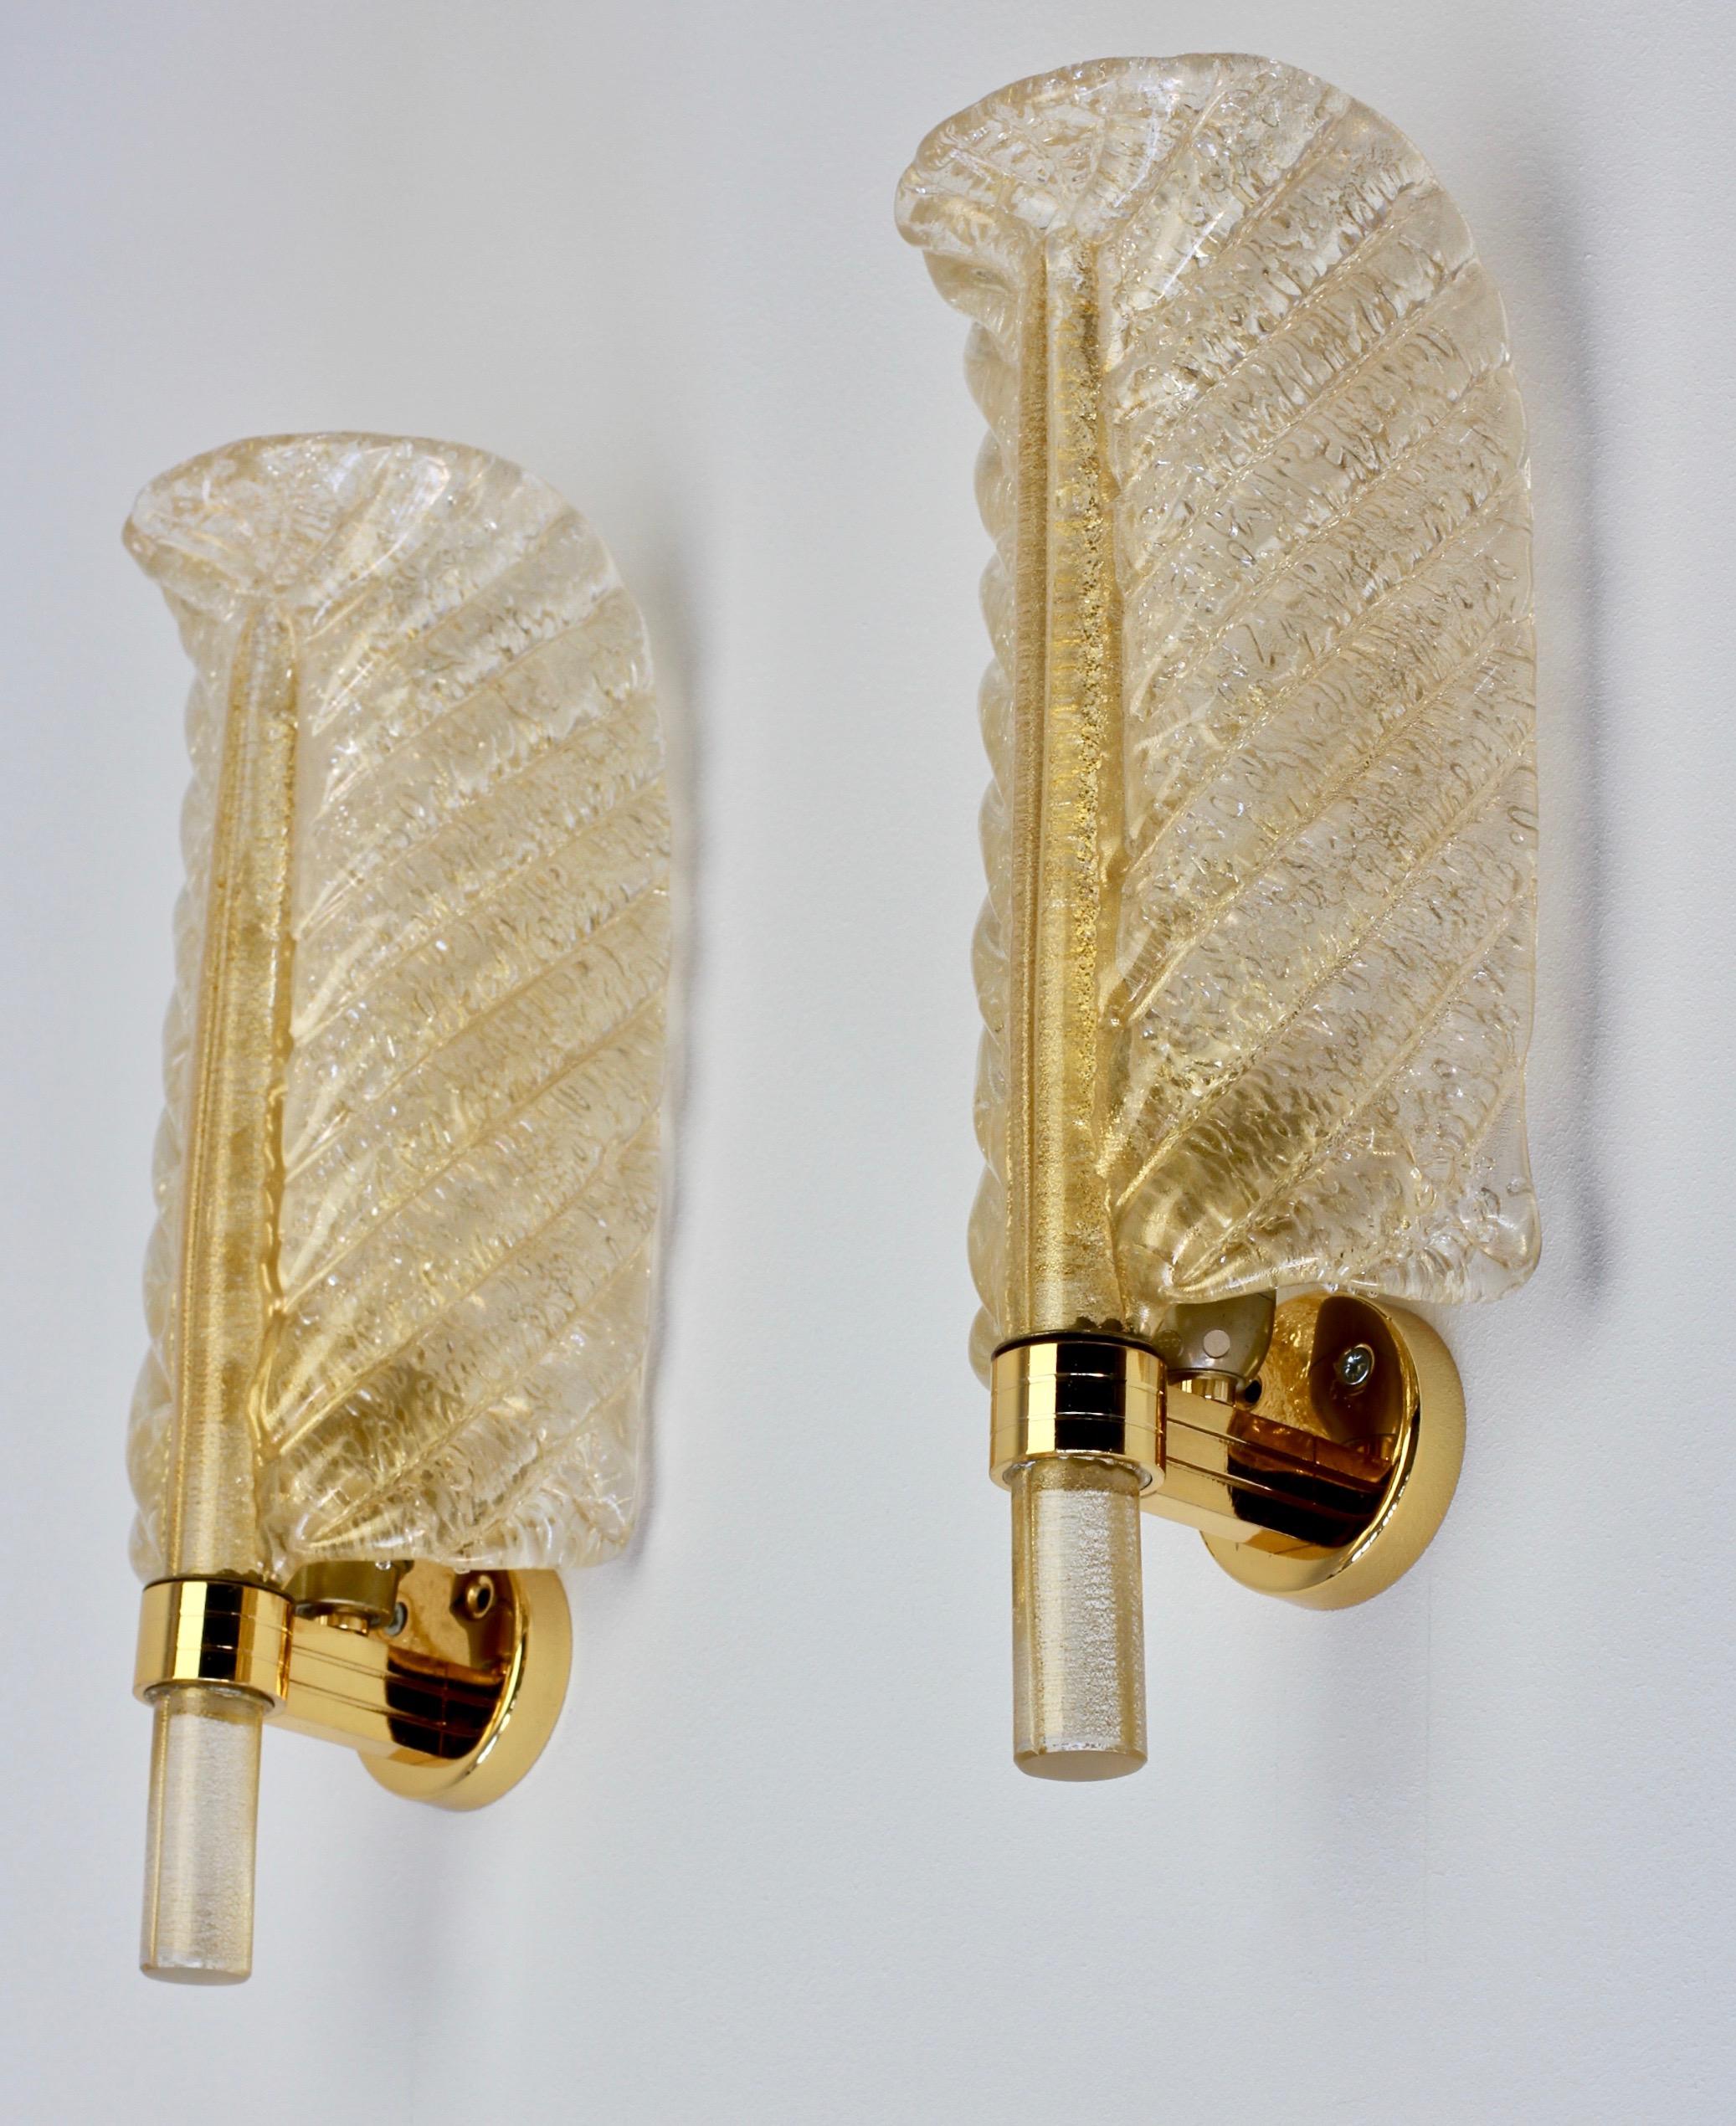 Barovier e Toso - a single Venetian neoclassical style Murano glass leaf sconce or wall mounted light made in Italy, circa 1980s. Made of textured clear glass with 24-carat gold inclusions handmade and shaped in to the form of curved leaves.